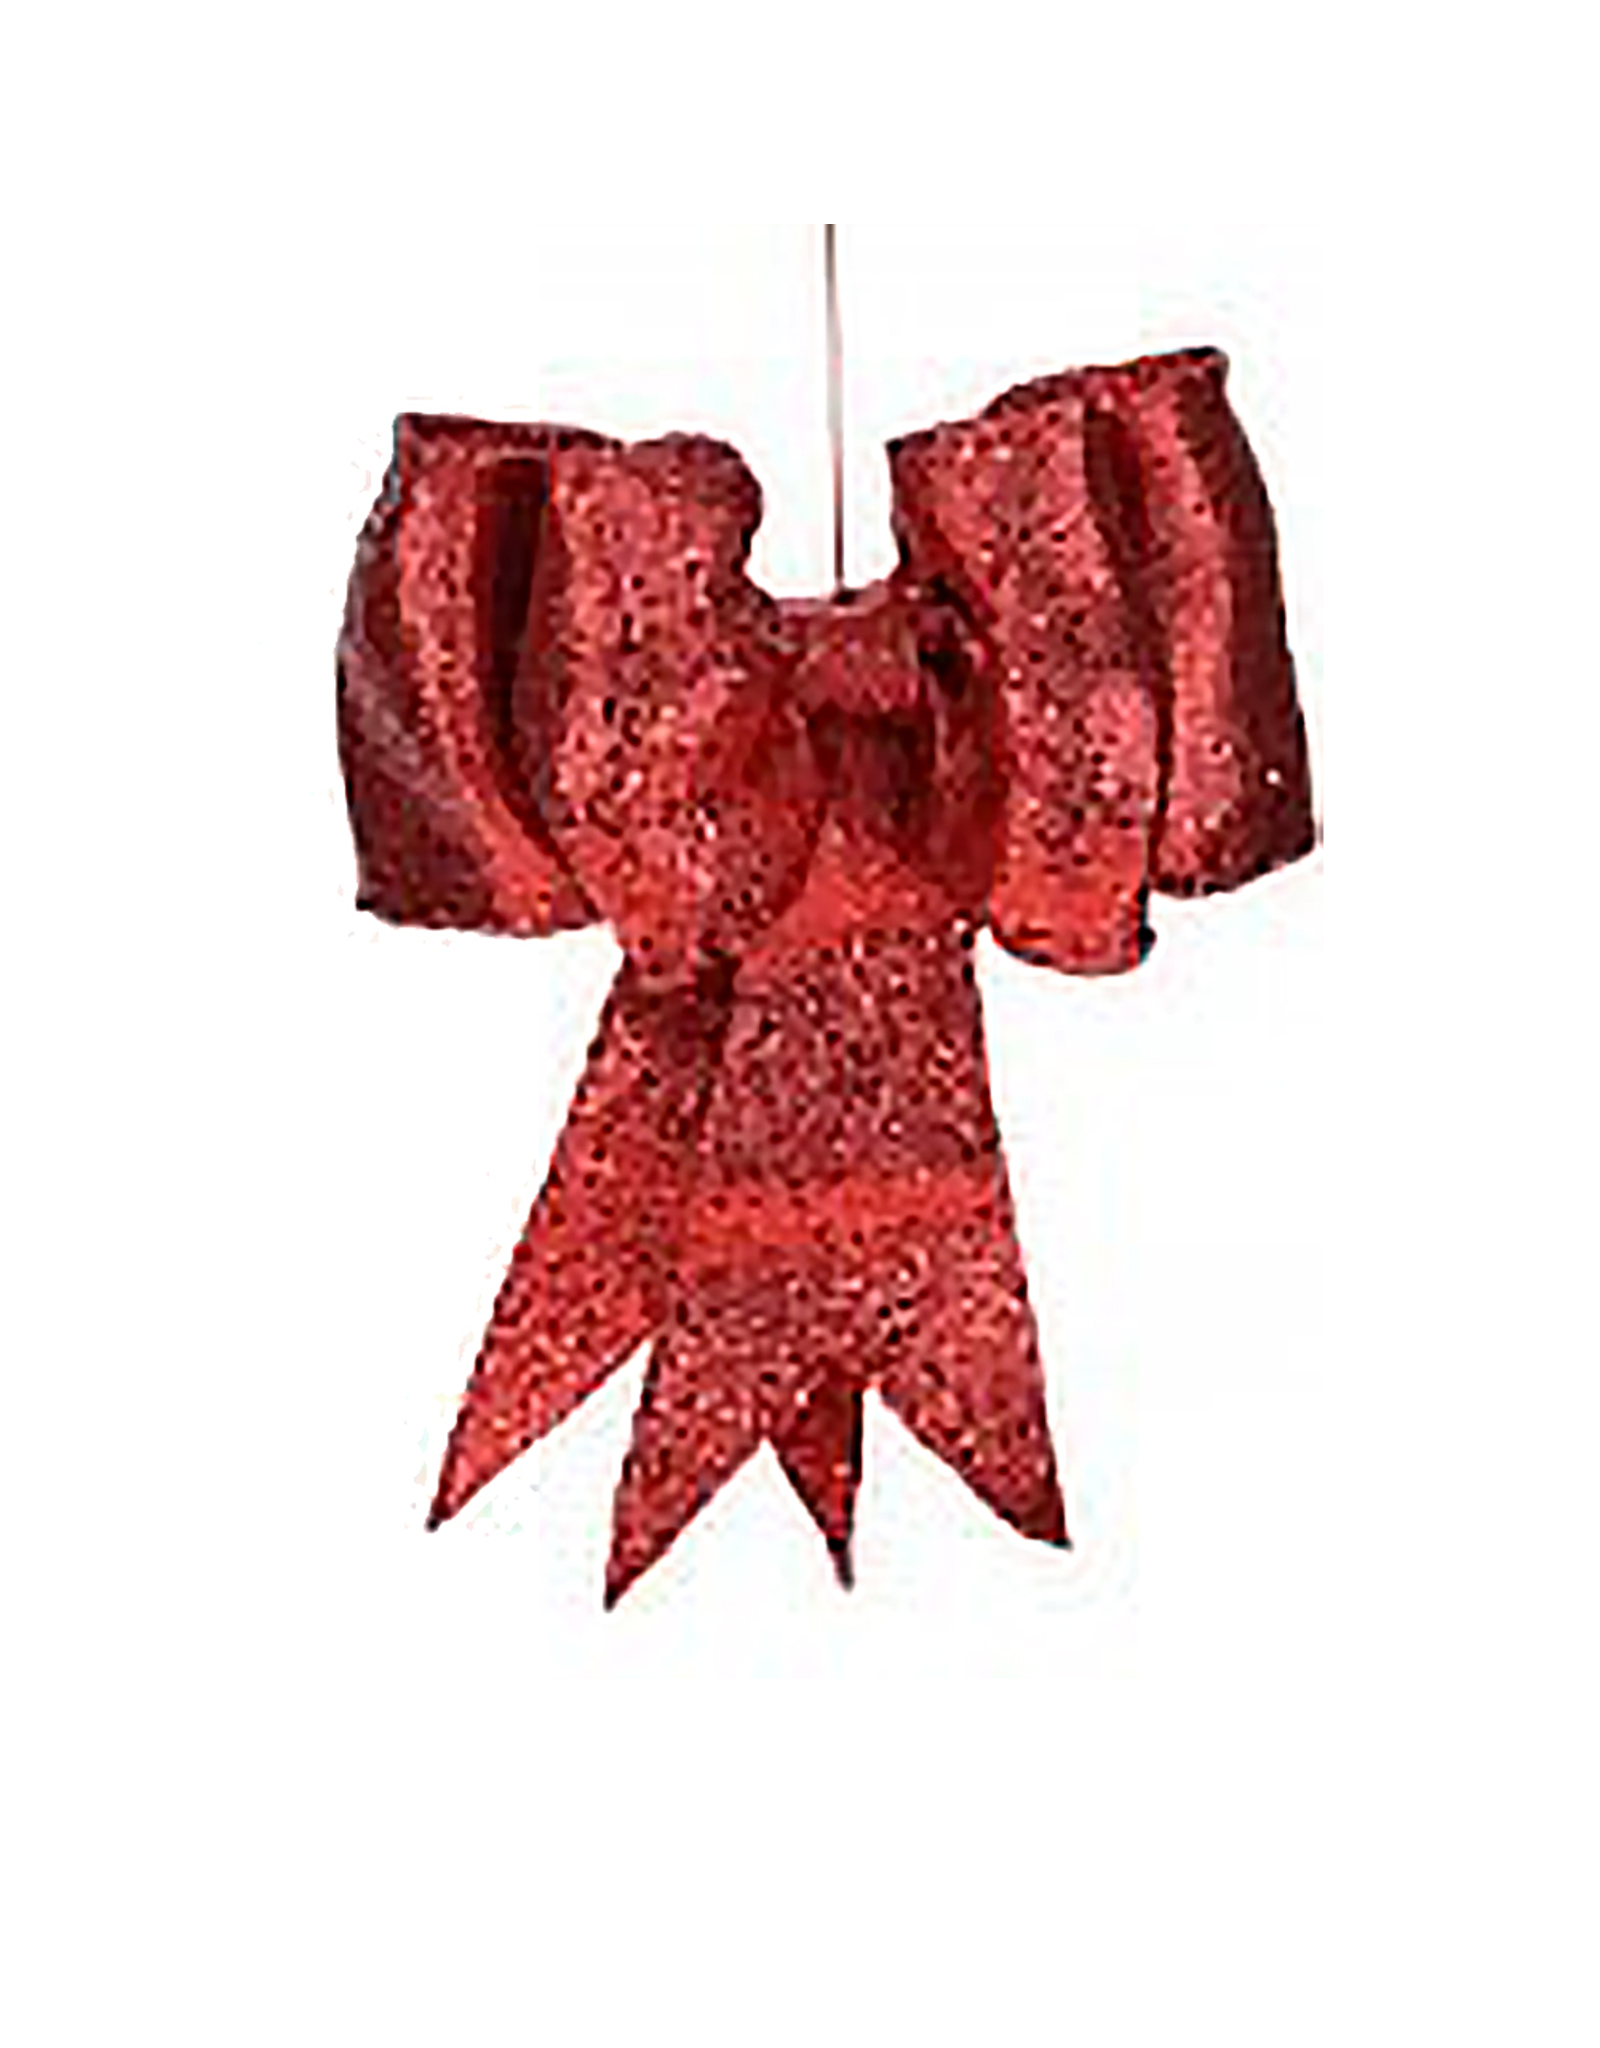 Red Glitter Bow SM 8 inch